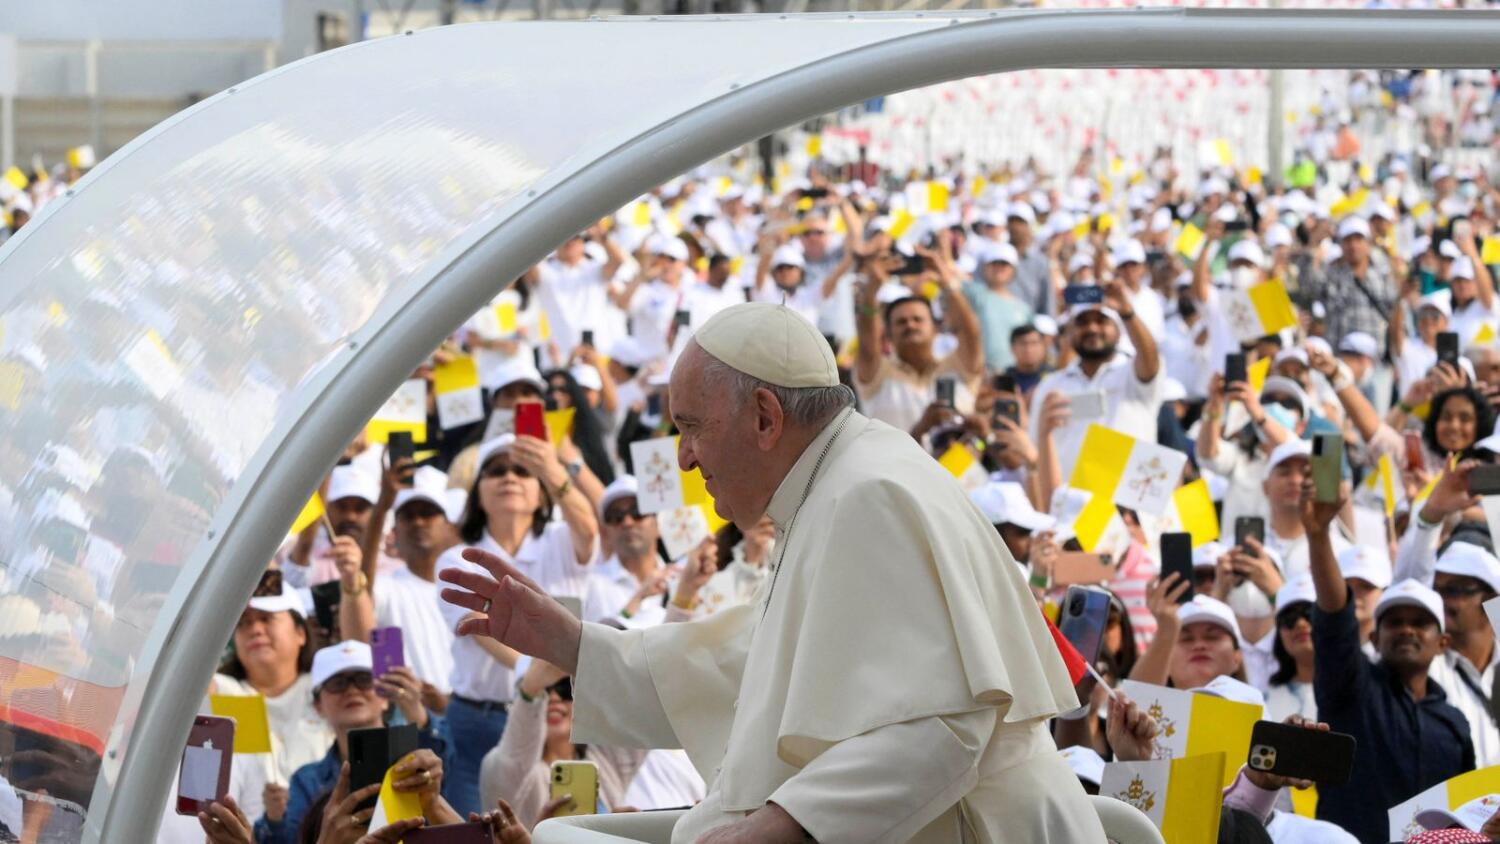 30,000 worshippers attend Pope’s mass in Bahrain